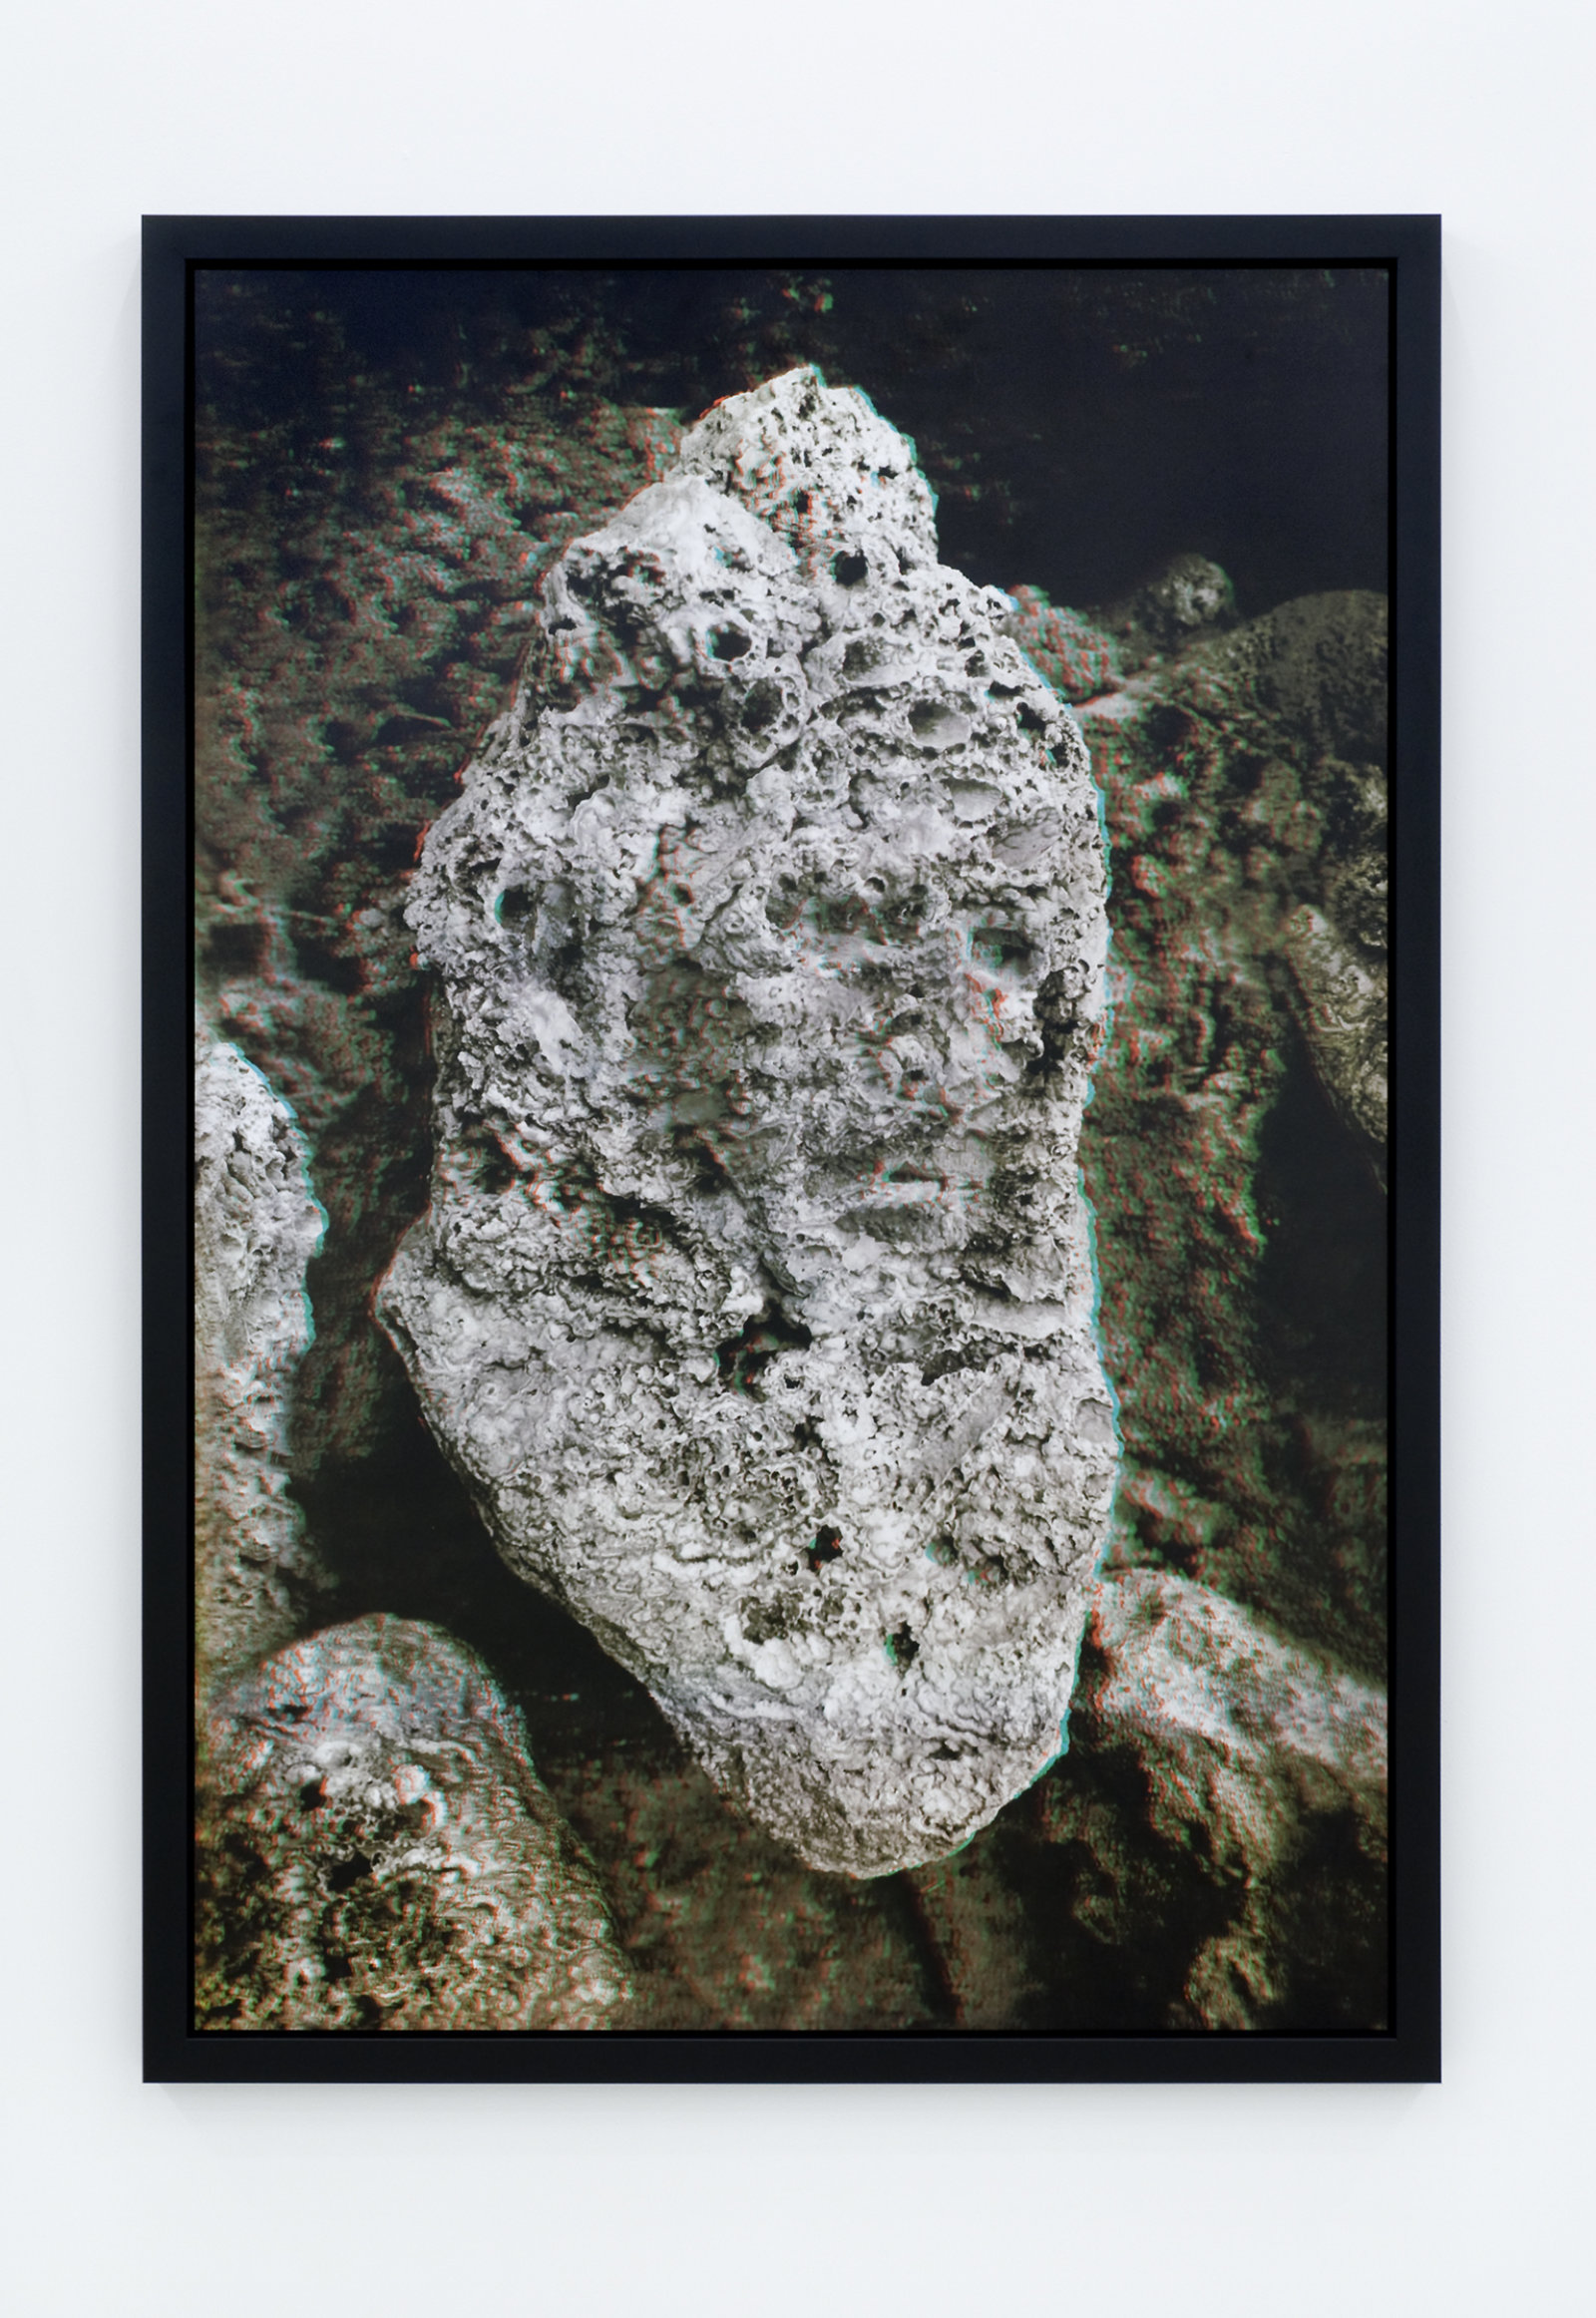 Geoffrey Farmer, Anaglyph poster, I saw Paul Virilio's face in a rock at the Source of Saint Leger, 2009, anaglyph poster, 72 x 50 (184 x 128 cm)